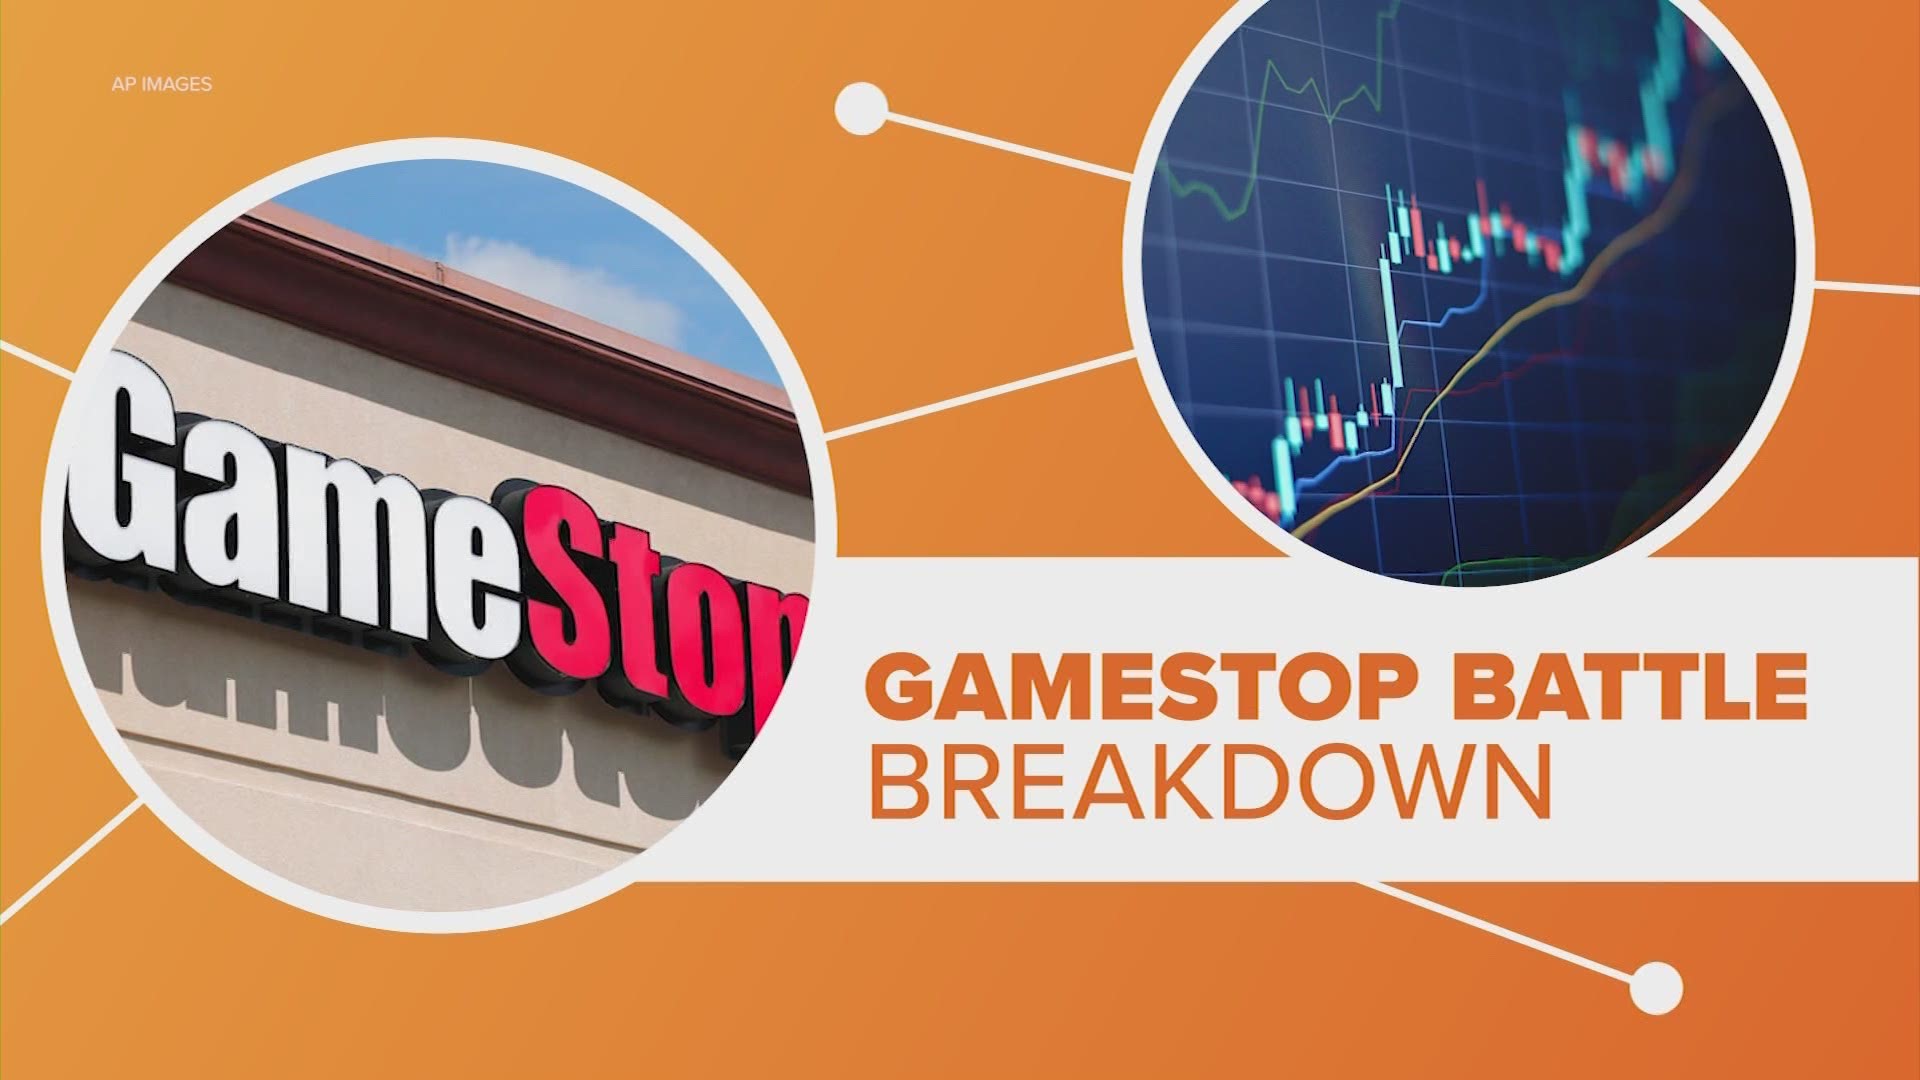 With the battle over GameStop stock making headlines, we are seeing a lot of investing terms being throw around. But what do they mean? Let’s connect the dots.